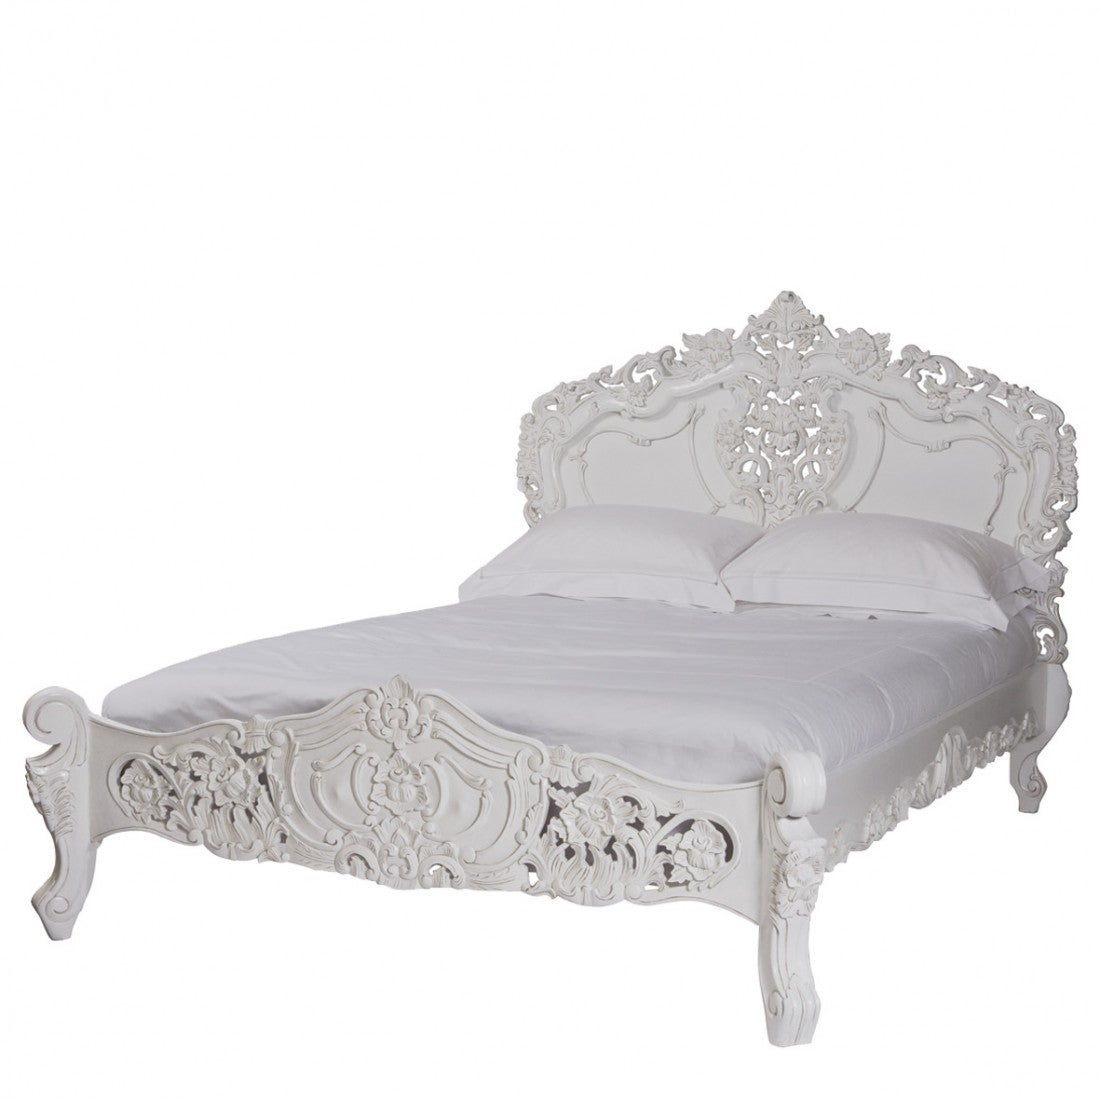 20th Century French Rococo or Louis XV Style Queen Size Bed